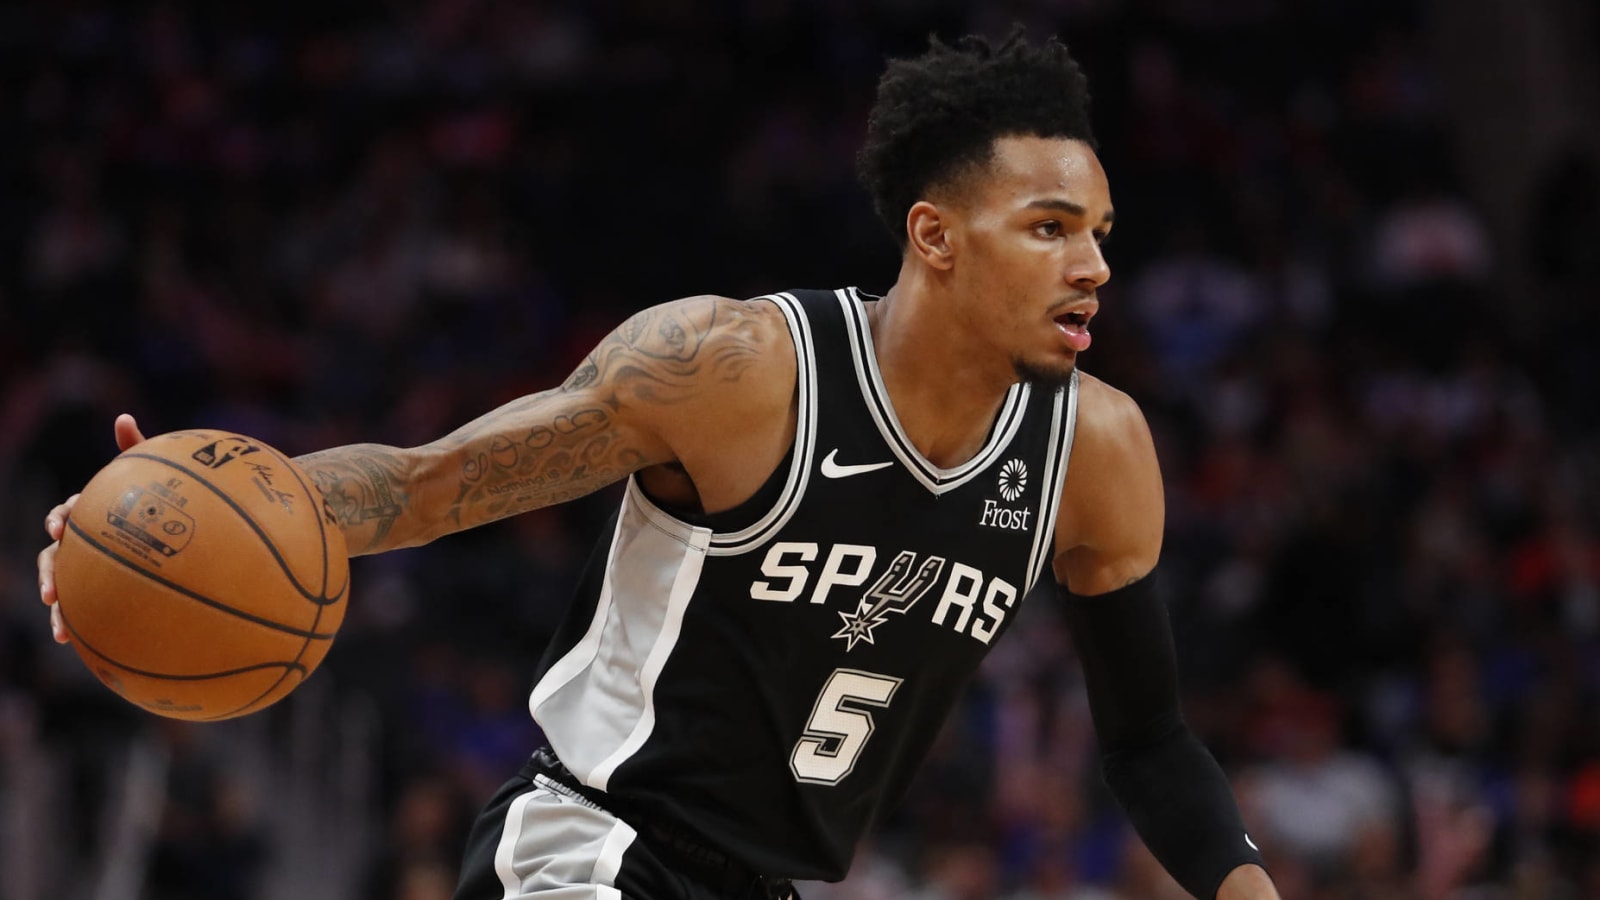 Dejounte Murray rounding into form after missing entire 2018-19 season